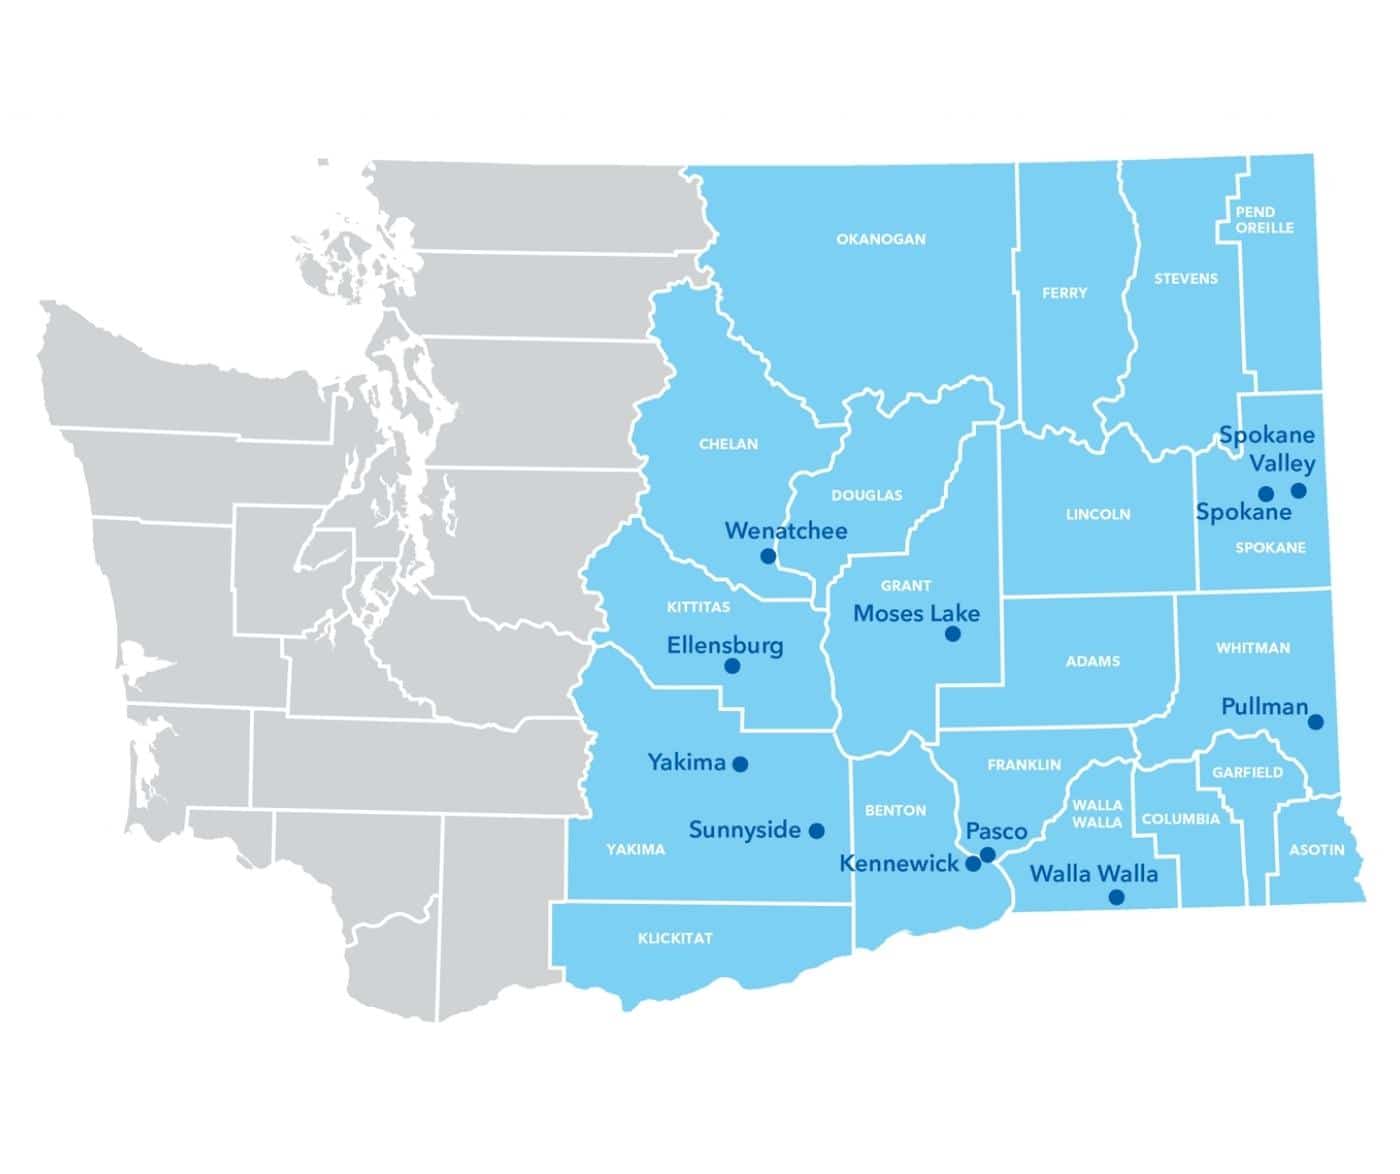 Map of Washington with county outlines showing blue counties east of the cascade mountain where clinics are located.